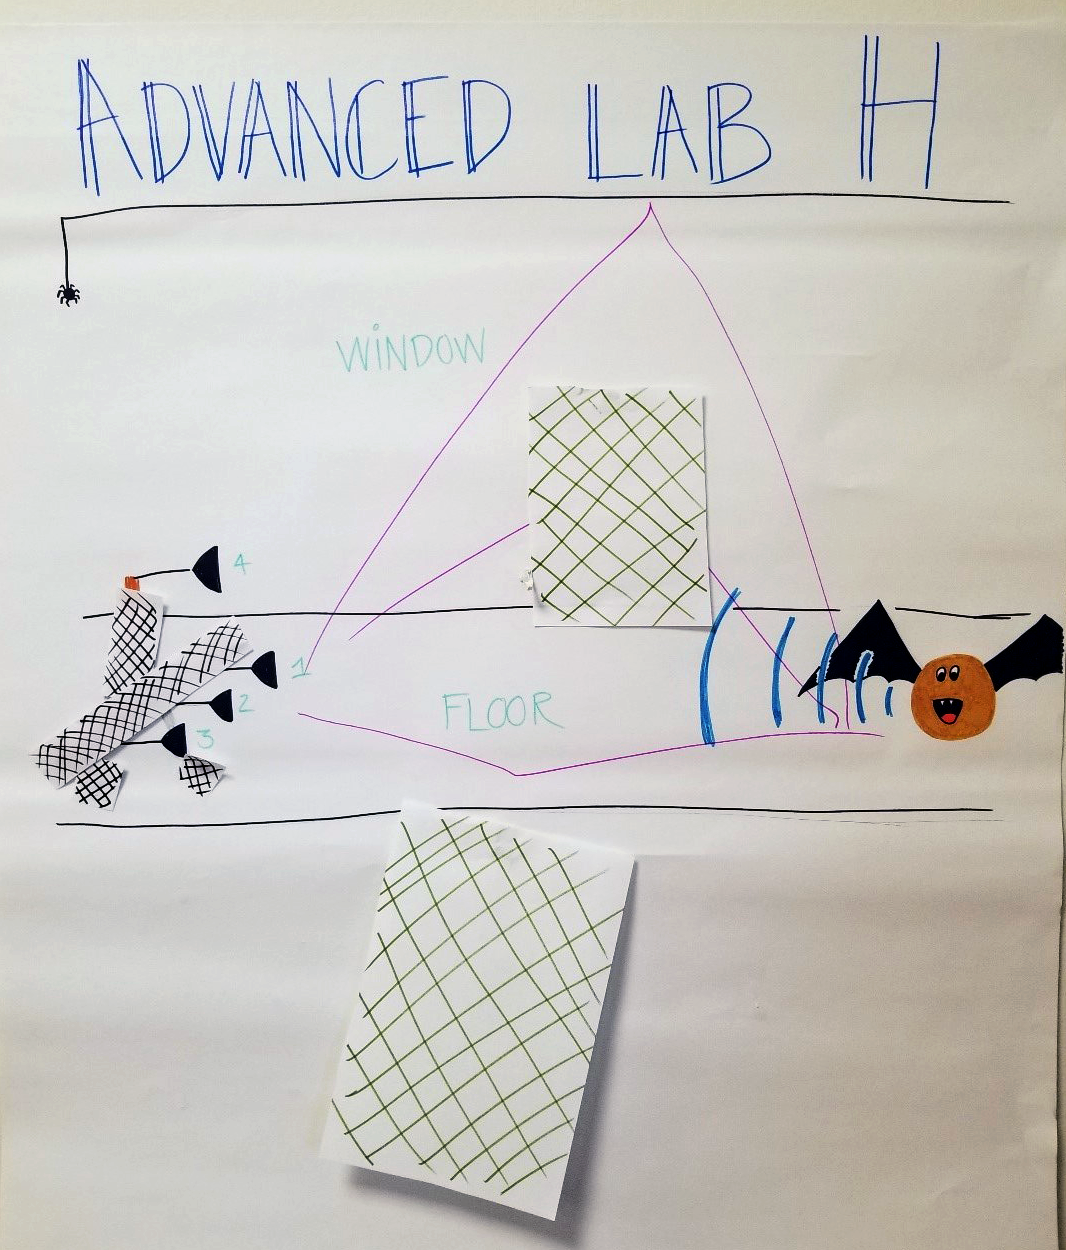 One of our group's "analog" presentation slides. We used giant "post-its" to explain our problem, and how we fixed it! We had to measure the source level of a vocalizing bat. But, first we had to reduce the reflections, and then we had to localize the bat.